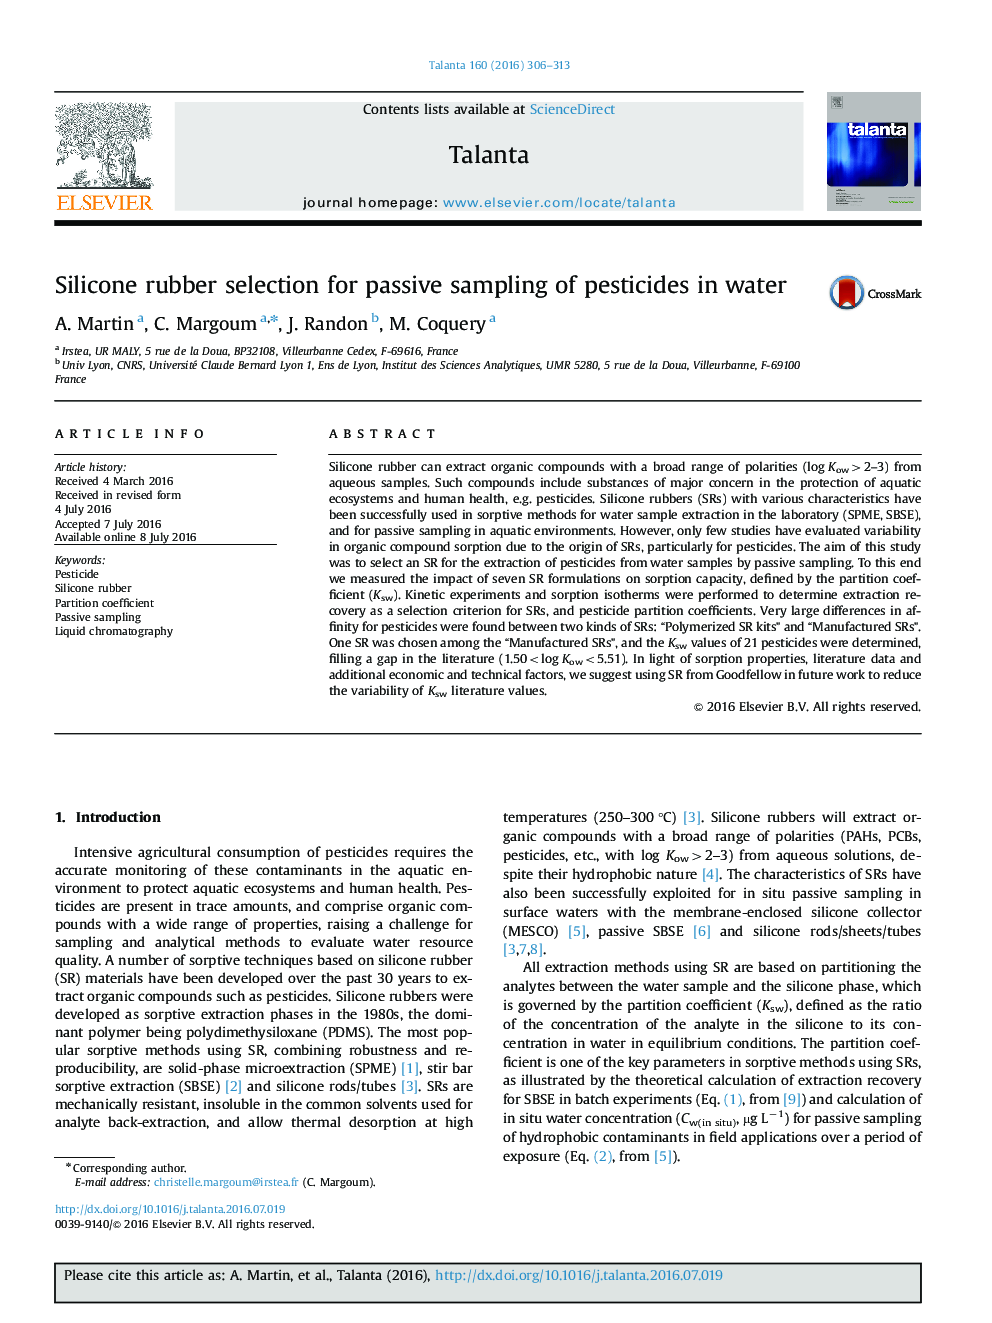 Silicone rubber selection for passive sampling of pesticides in water